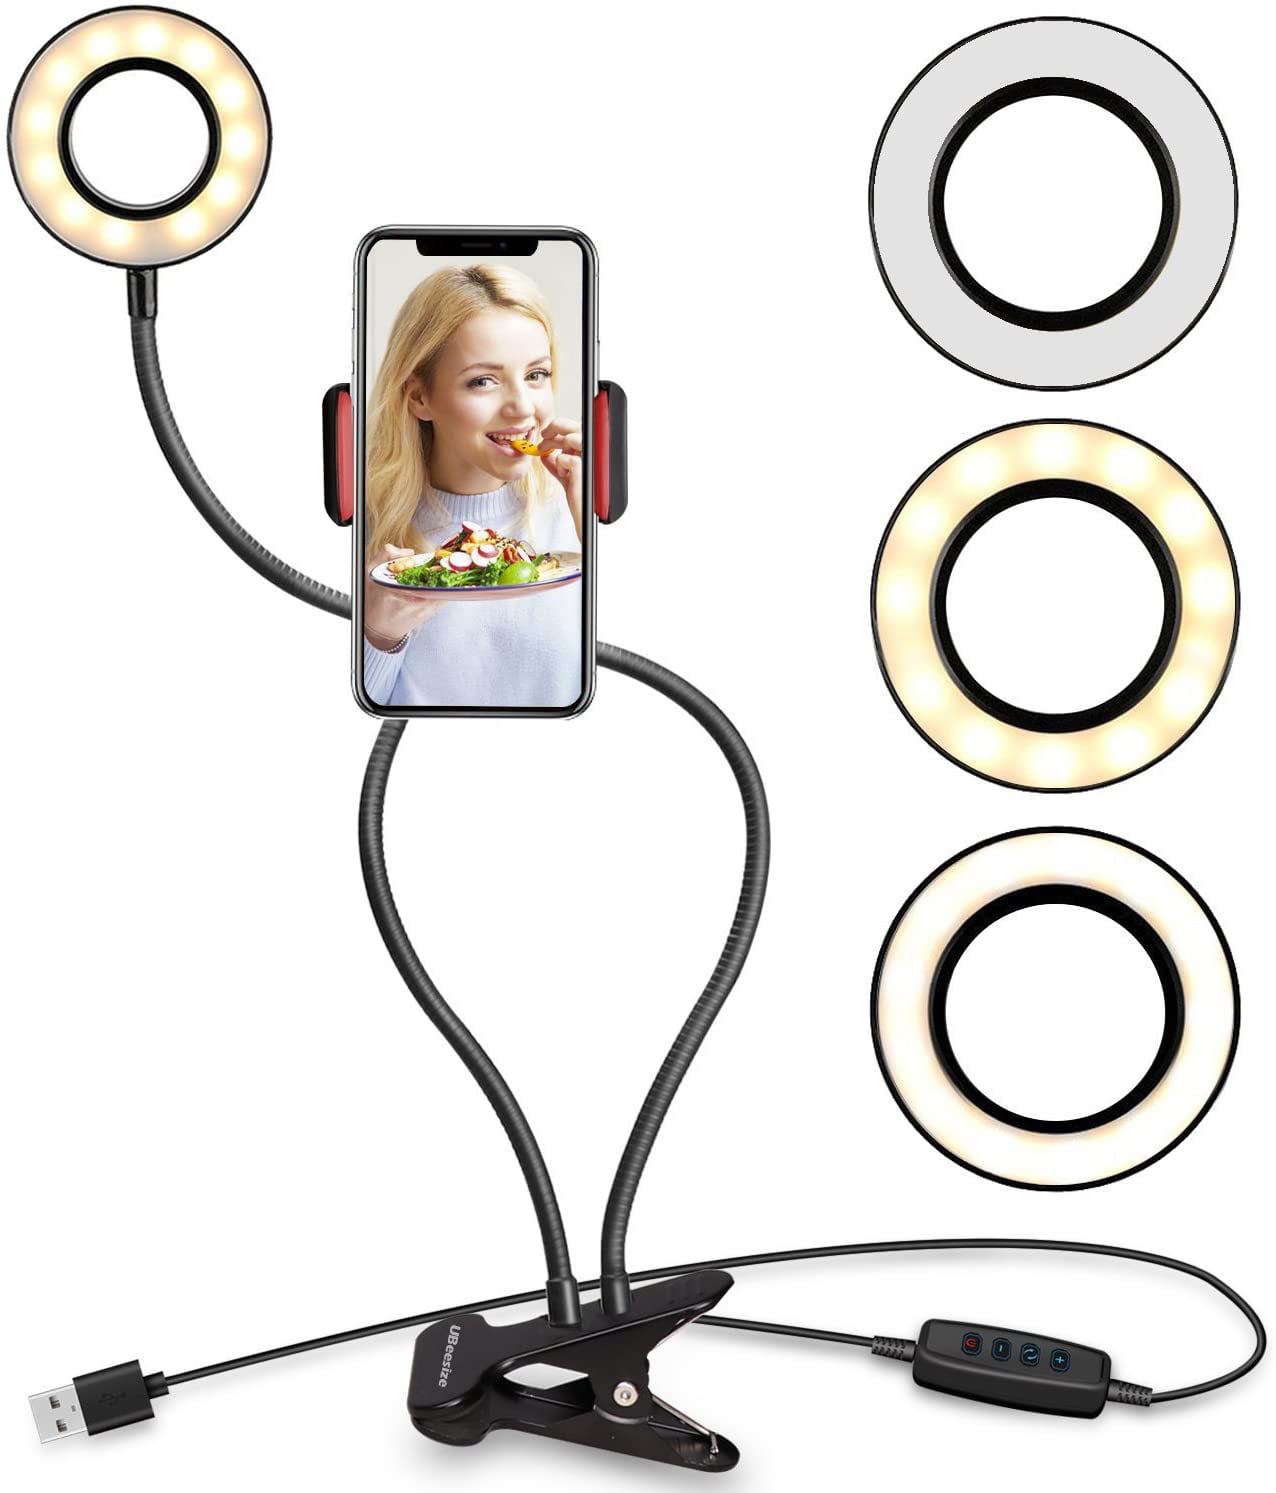 LING AI DA MAI Ring Light kit dimmable Selfie Ring Light LED Camera Ring Light for YouTube Video/Photography 14with Tripod and Mobile Phone Holder 